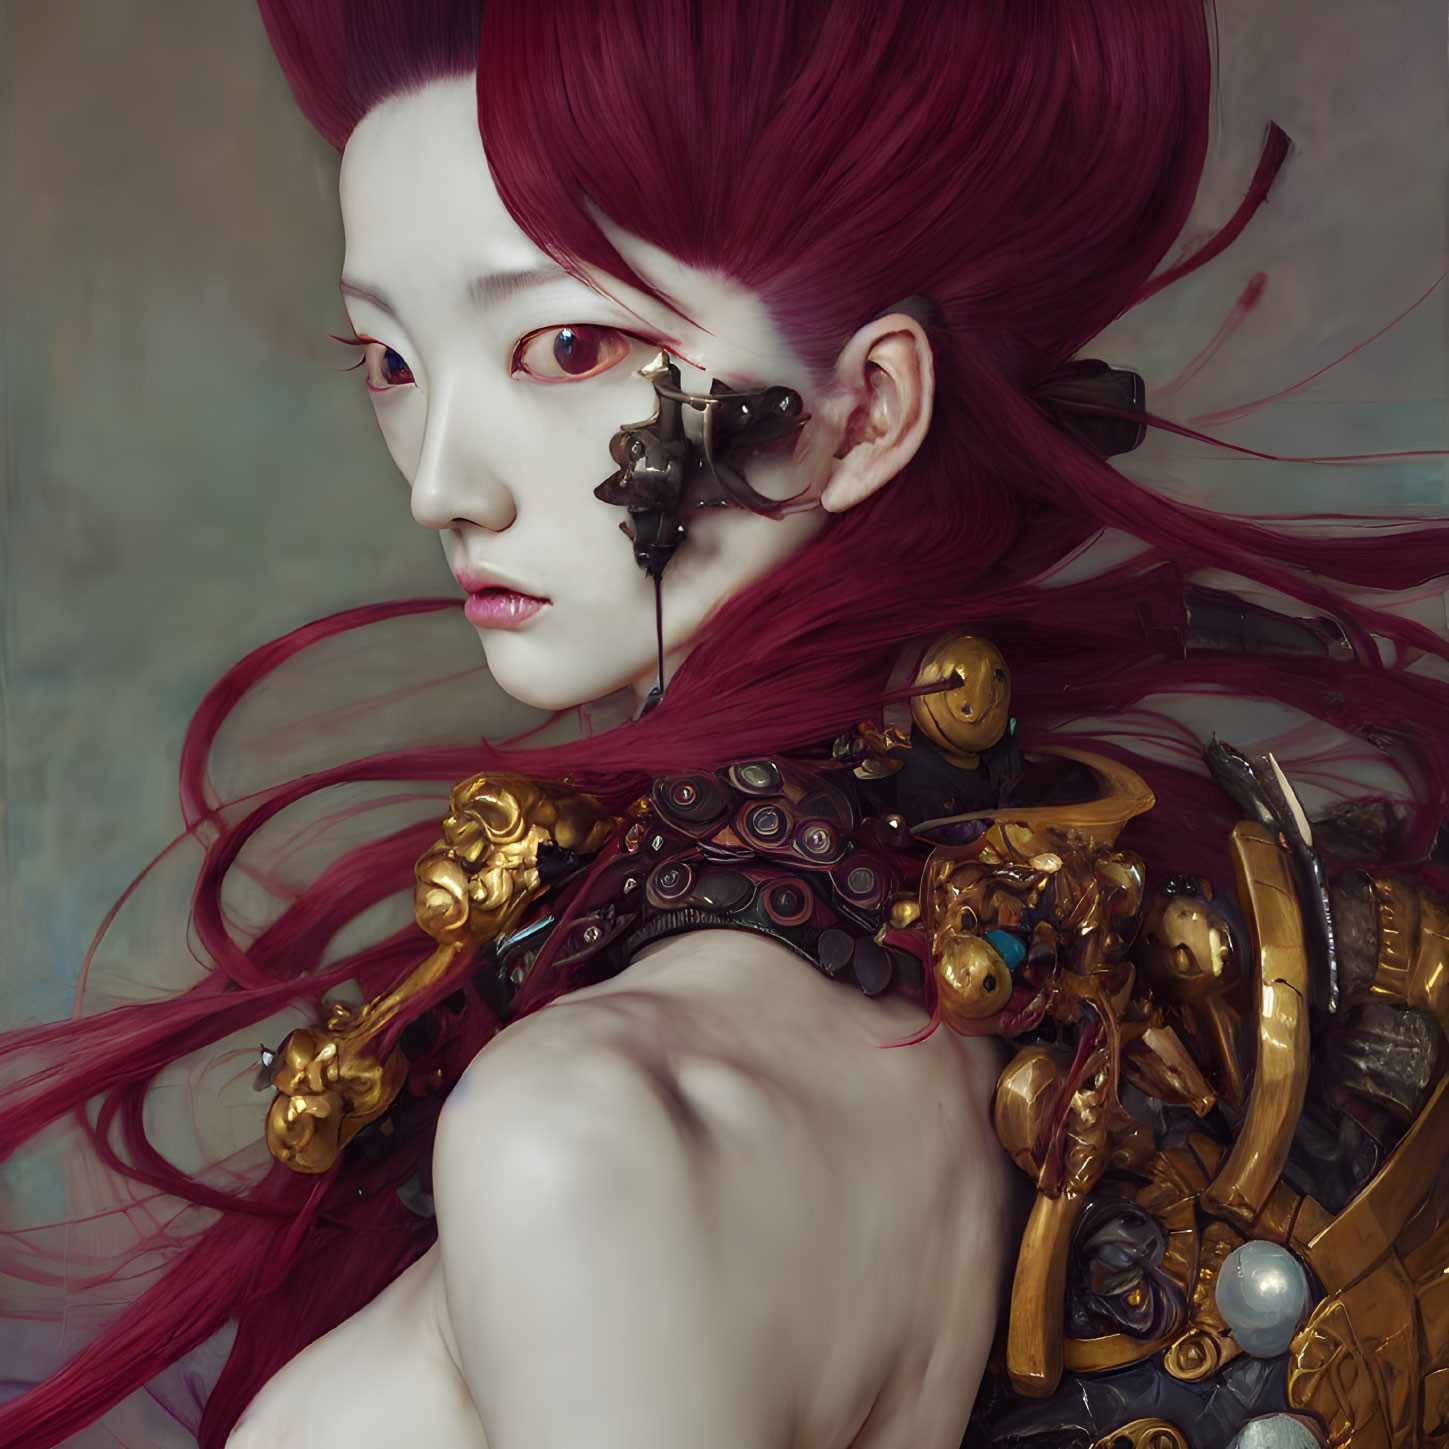 Vibrant Red-Haired Woman with Mechanical Augmentation in Cyberpunk Setting